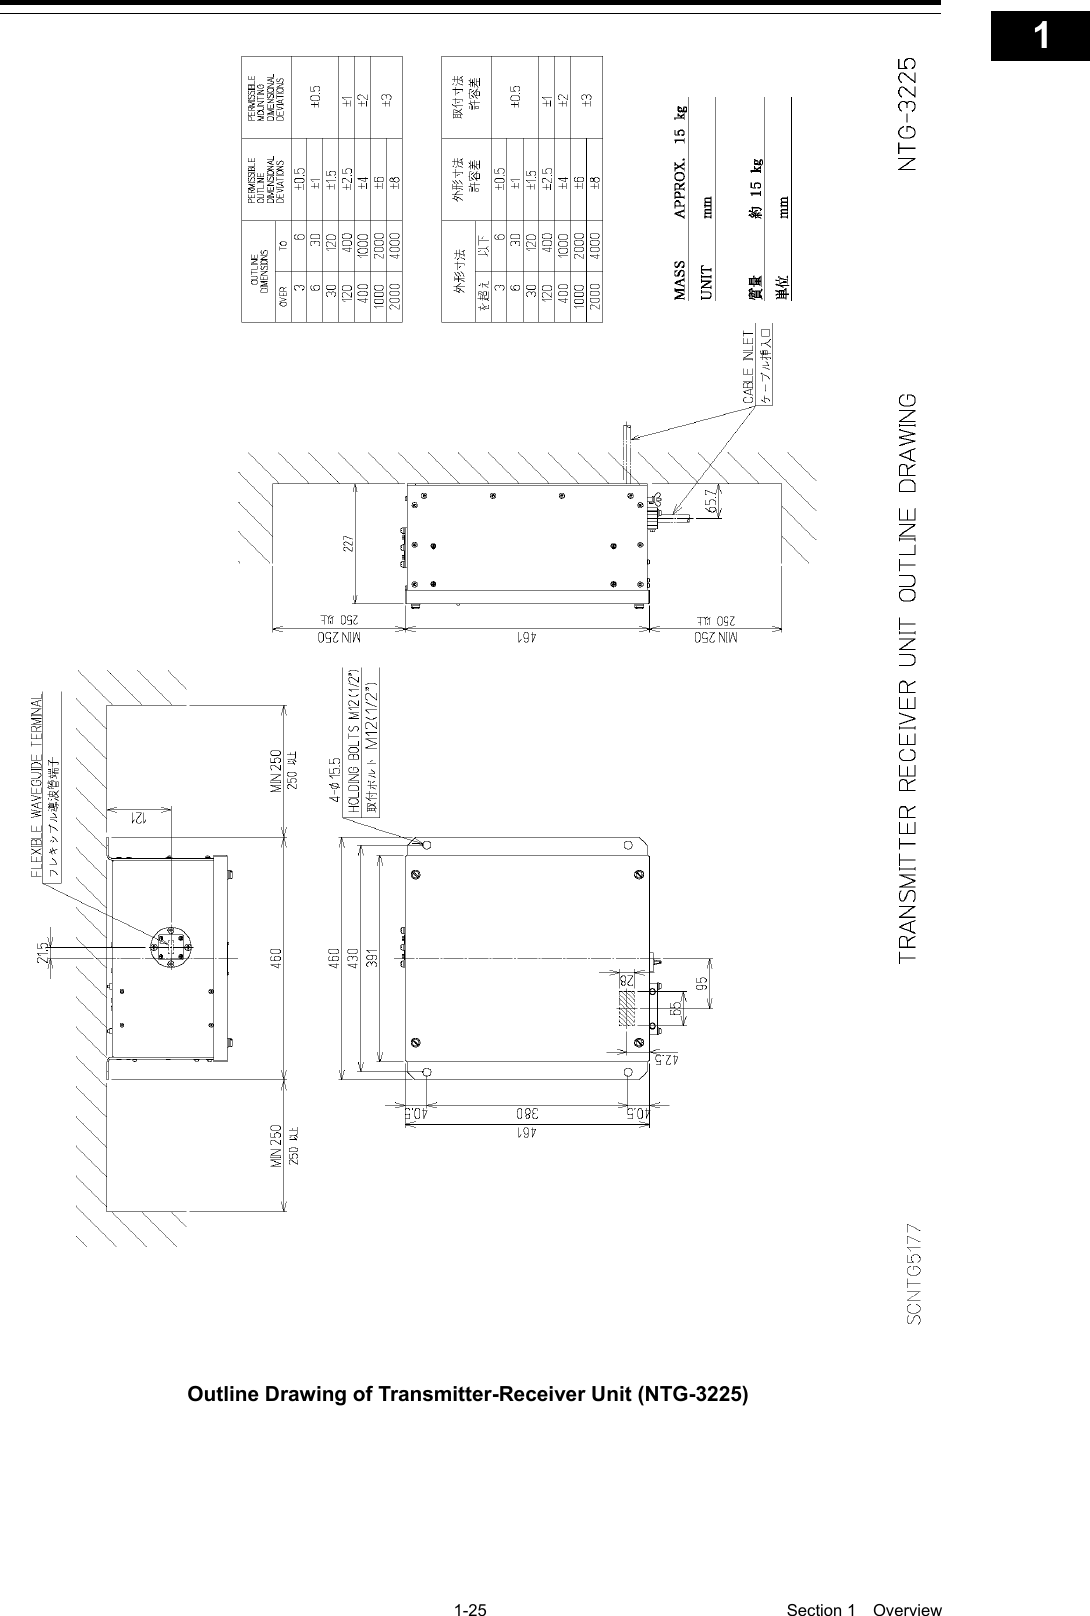   1-25  Section 1  Overview    1  2  3  4  5  6  7  8  9  10  11  12  13  14  15  16  17  18  19  20  21  22  23  24  25  26  27  付録     Outline Drawing of Transmitter-Receiver Unit (NTG-3225) 